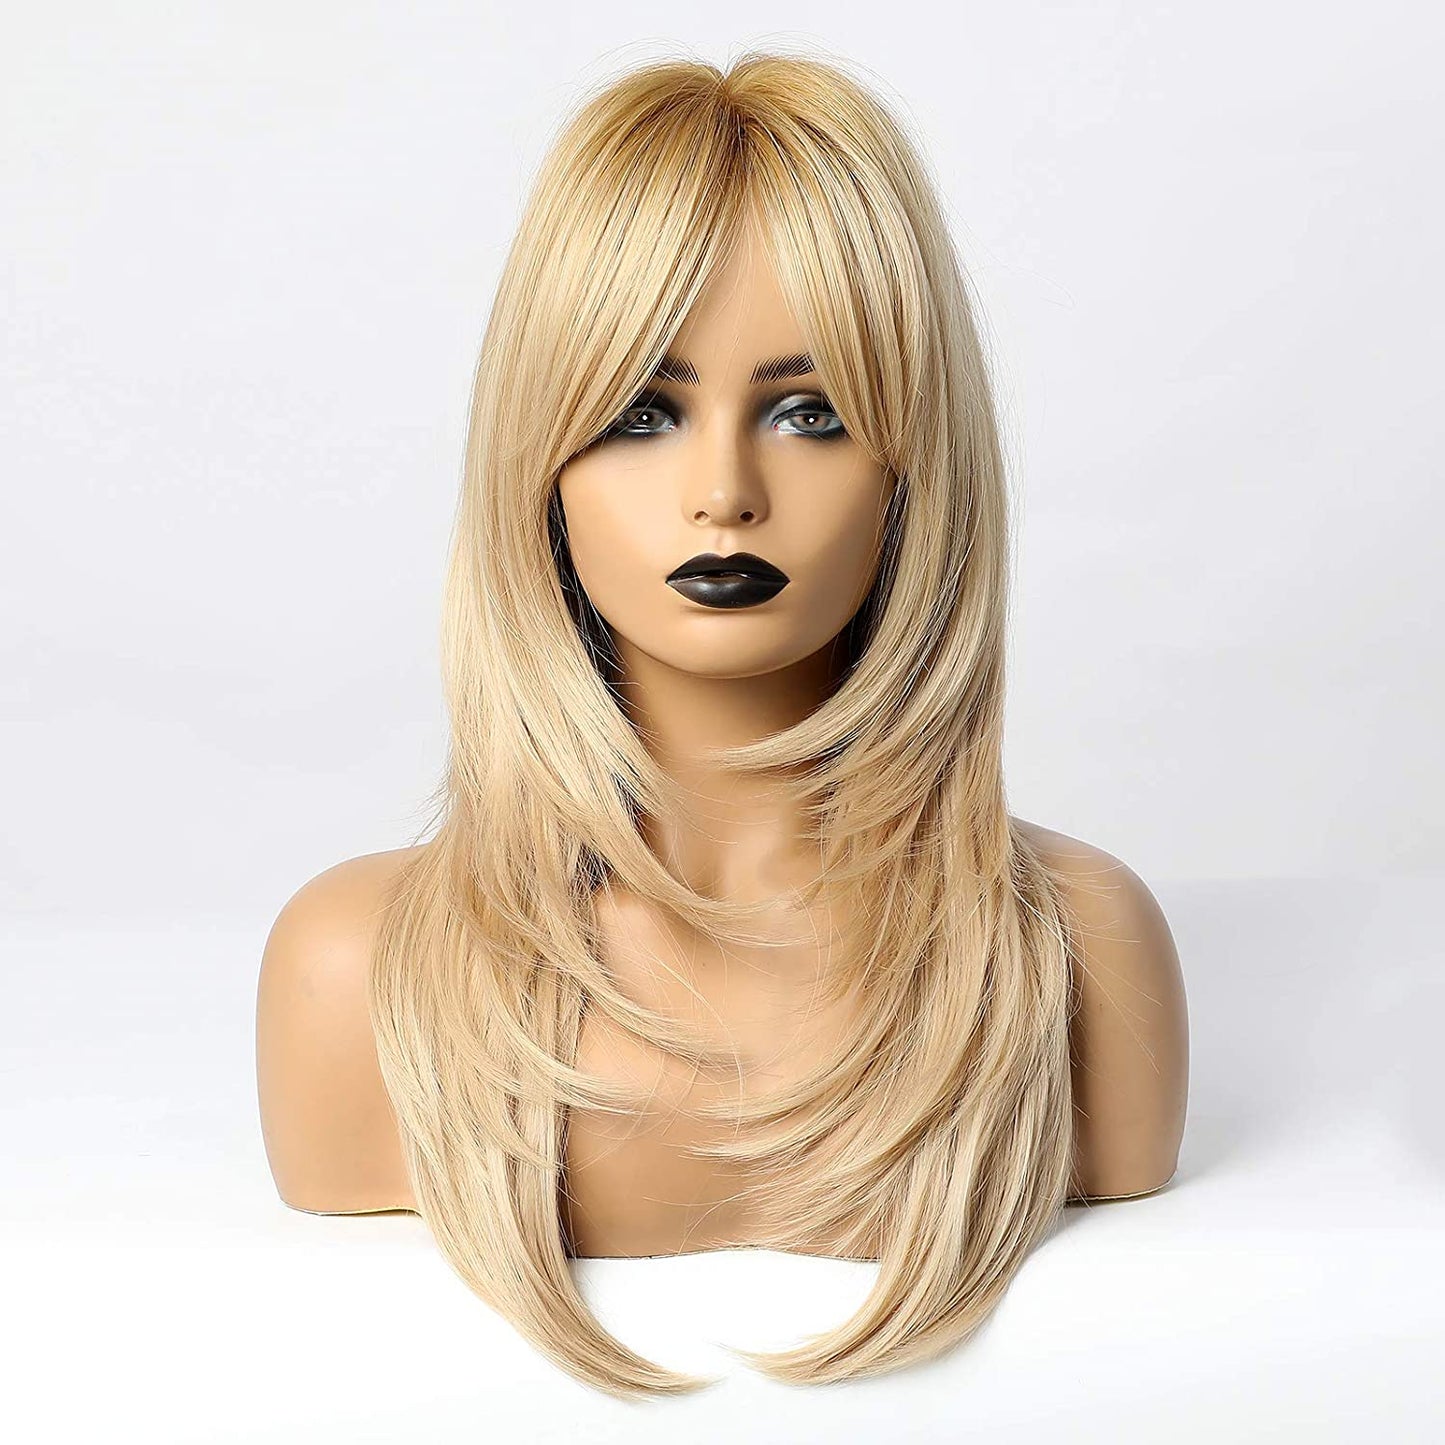 Lush Locks Synthetic Straight Blonde With Bangs Hair Wig For Women